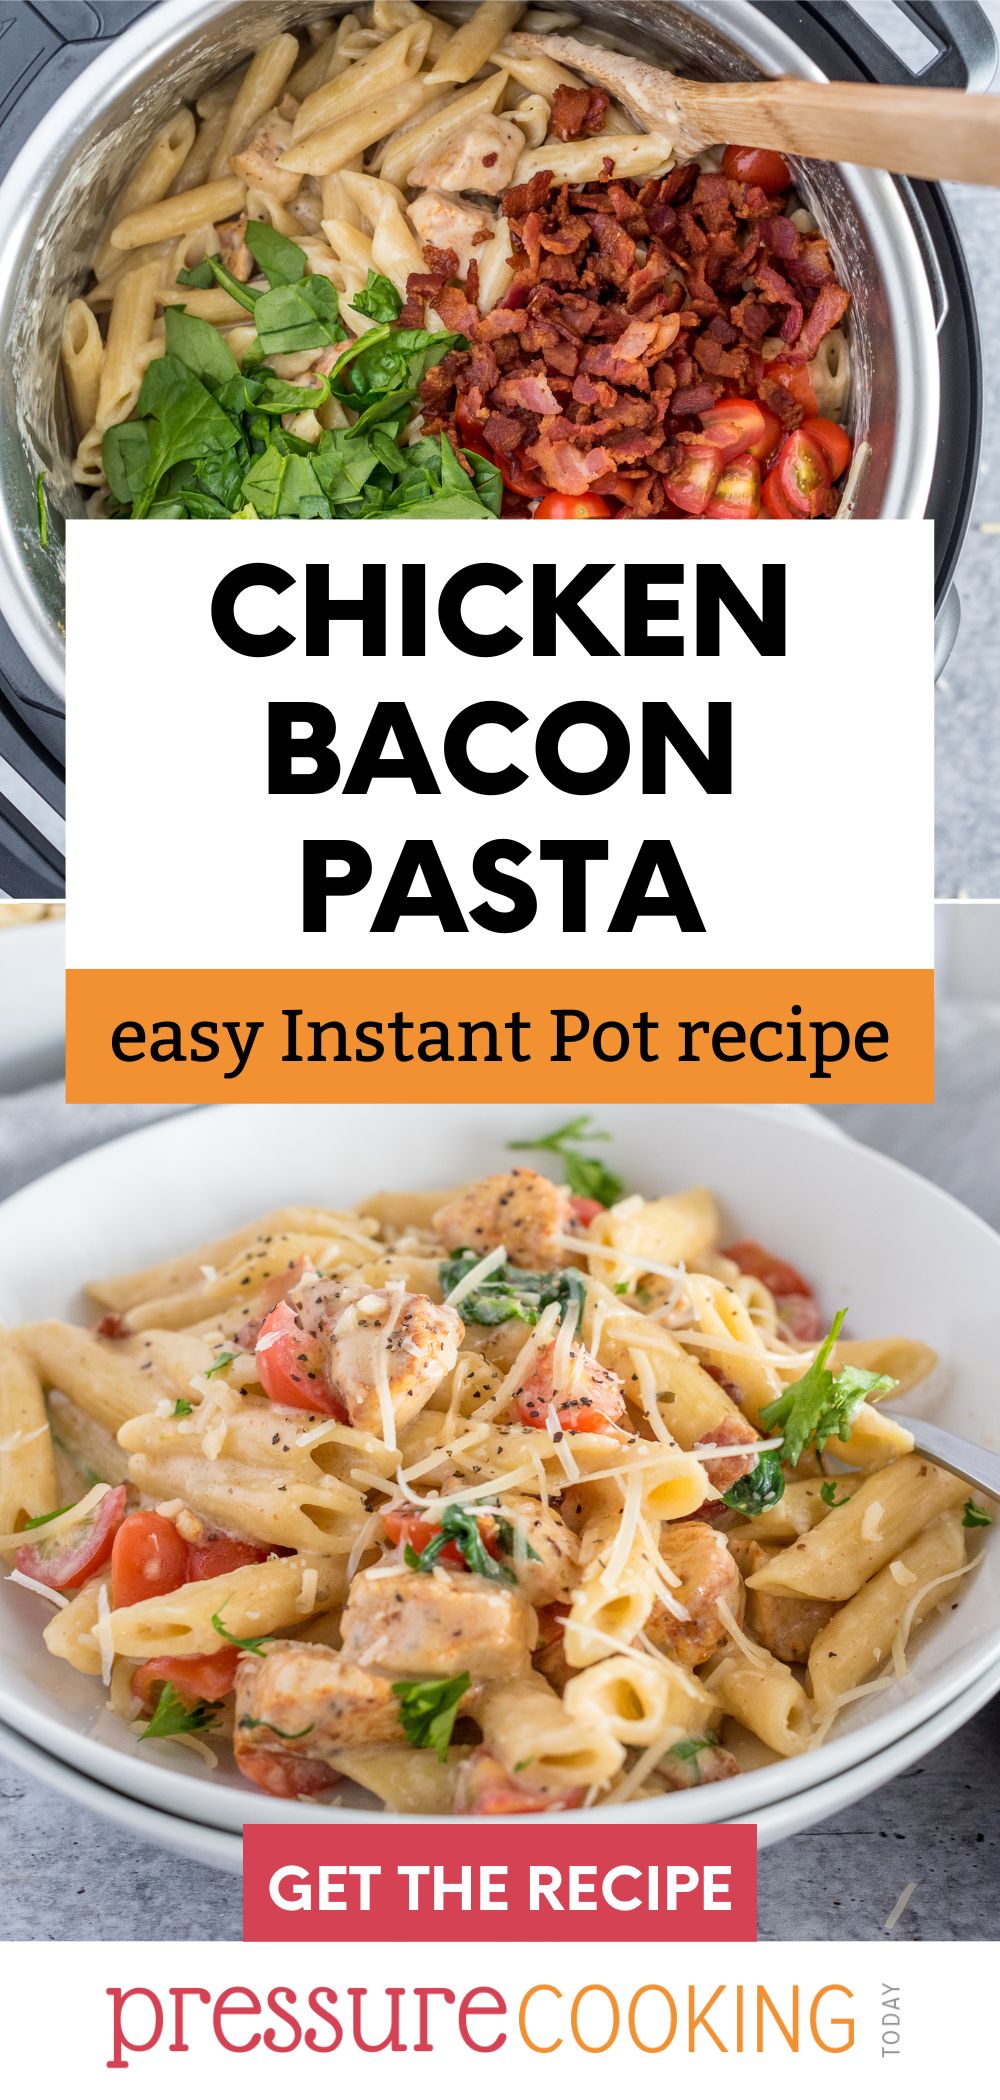 a pinterest image that reads "chicken bacon pasta: easy Instant Pot recipe" over two photos. The top photo features a wooden spoon stirring pasta, spinach, bacon, and fresh-cut tomatoes. The bottom image shows a dished-up bowl garnished with extra parmesan cheese. via @PressureCook2da